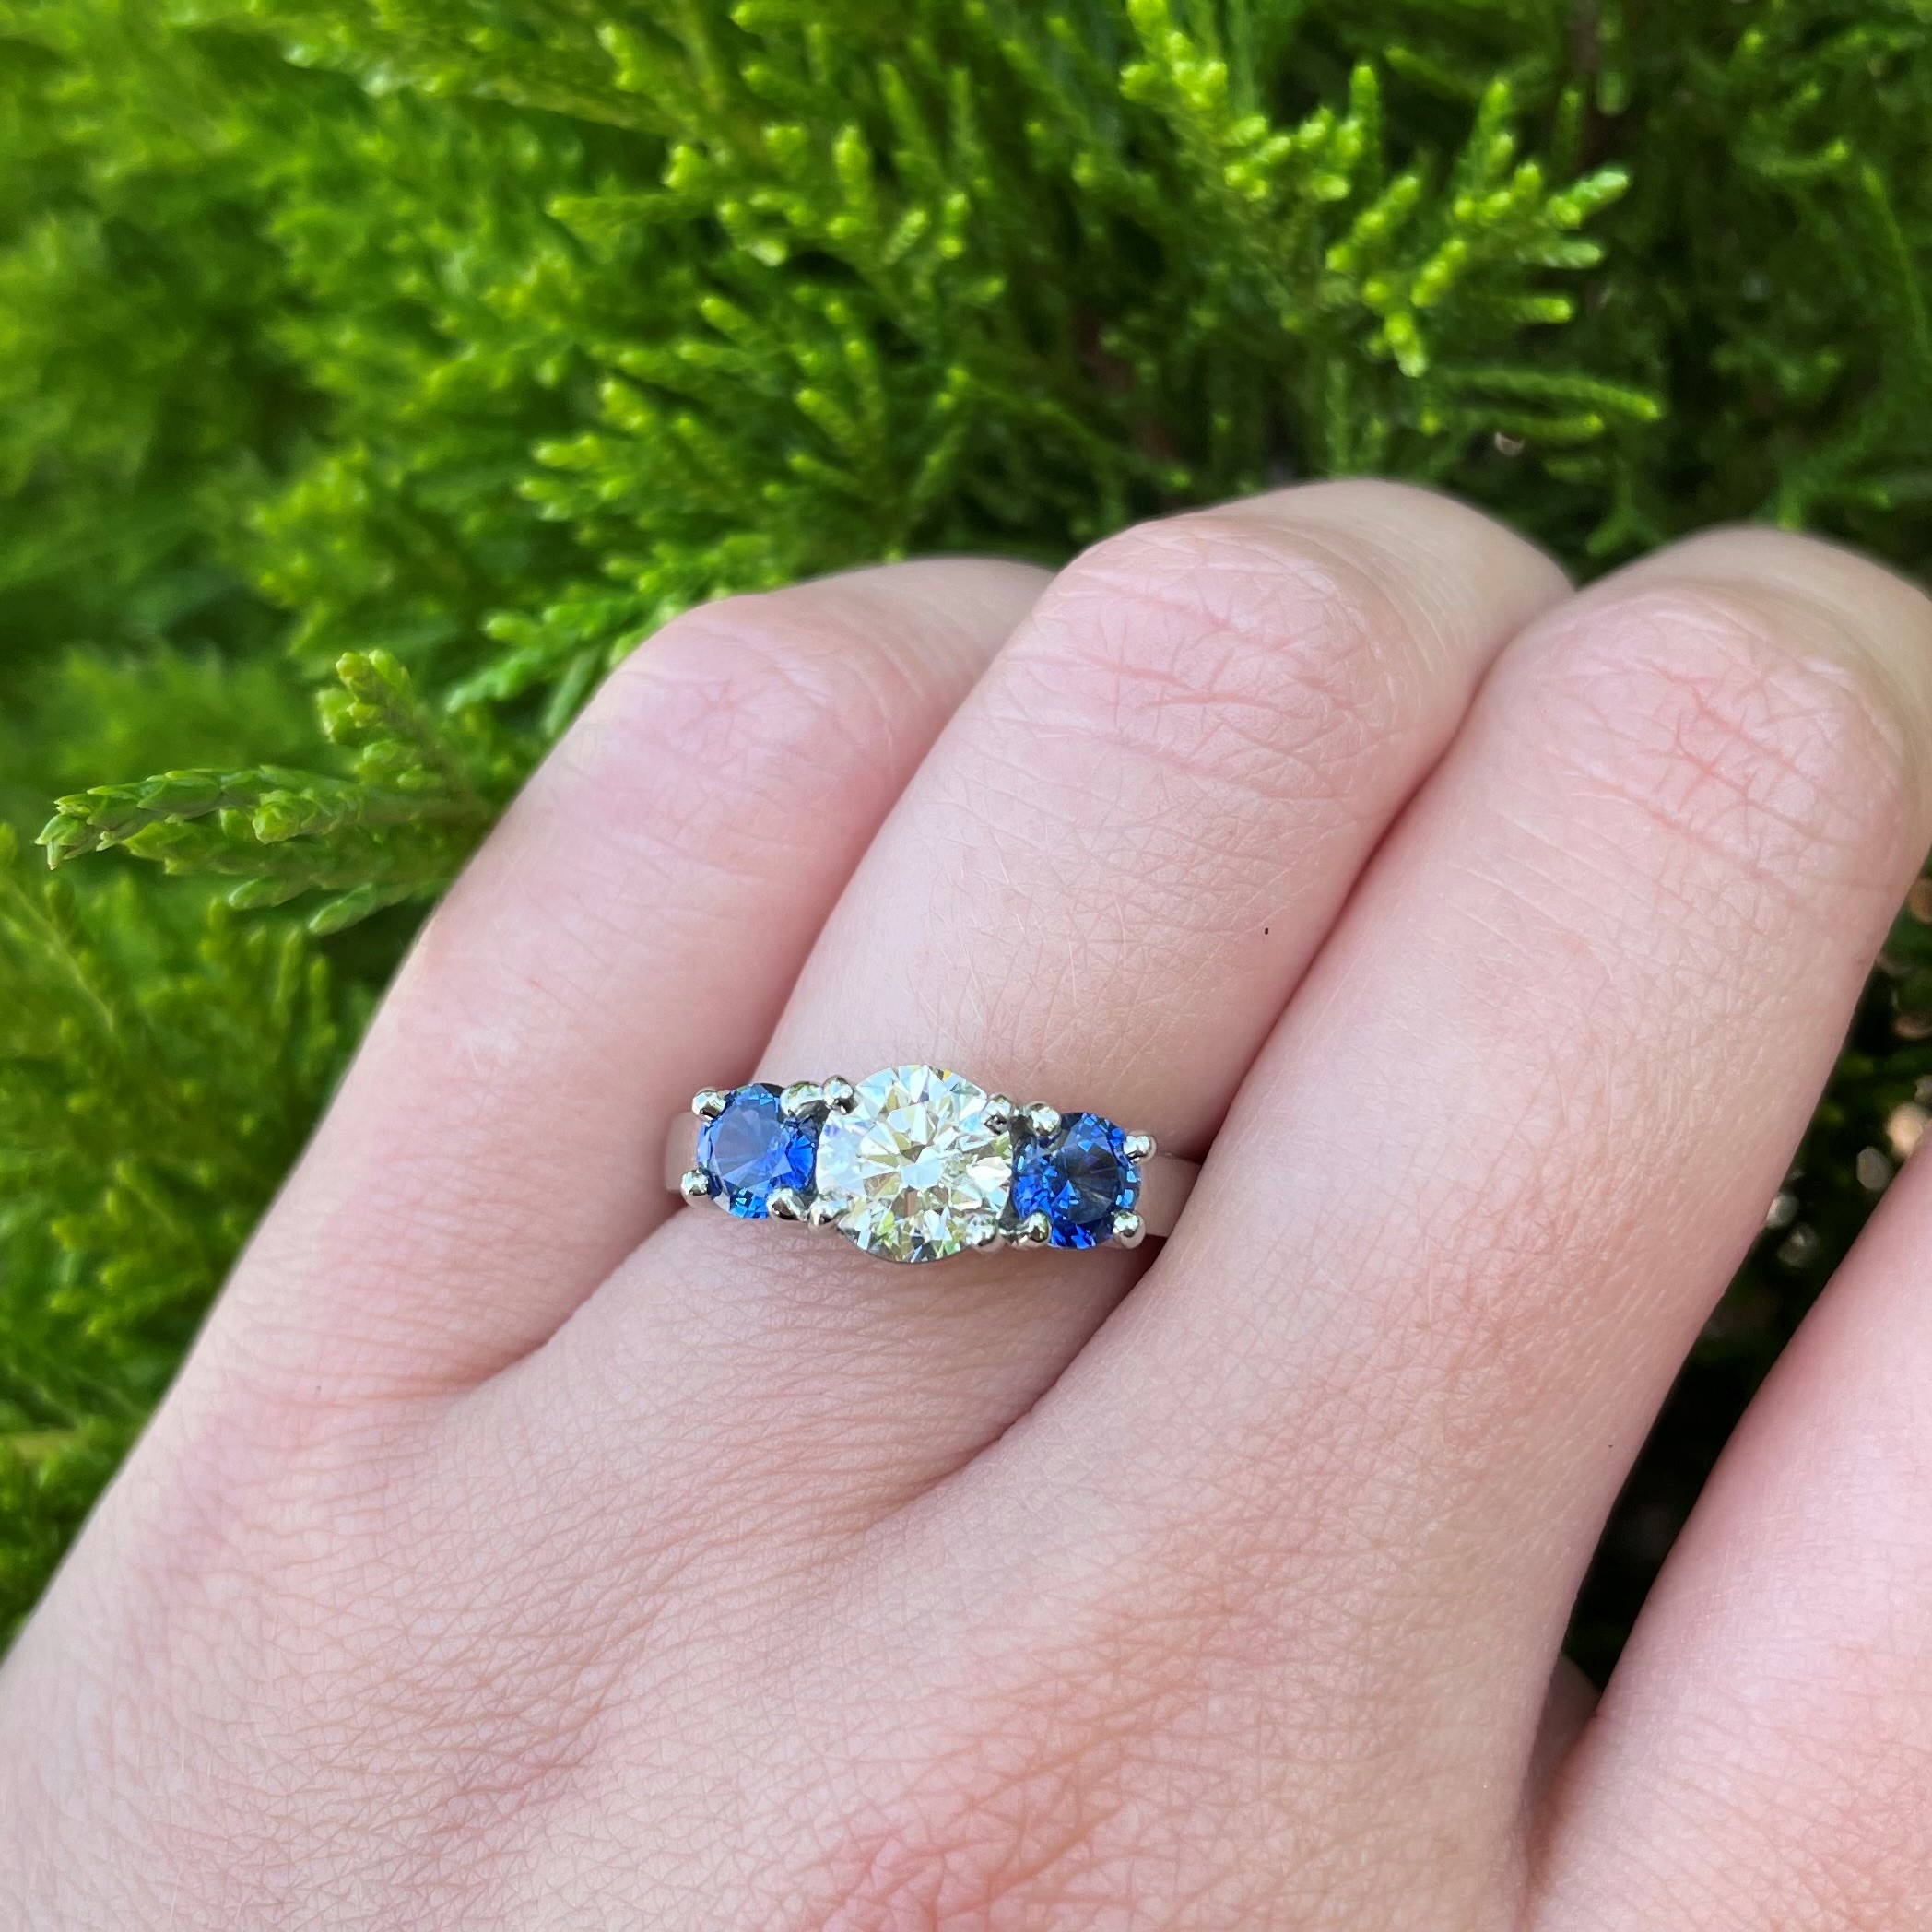 Automic Gold Three Stone Sapphire Ring | Sustainable Fine Jewelry